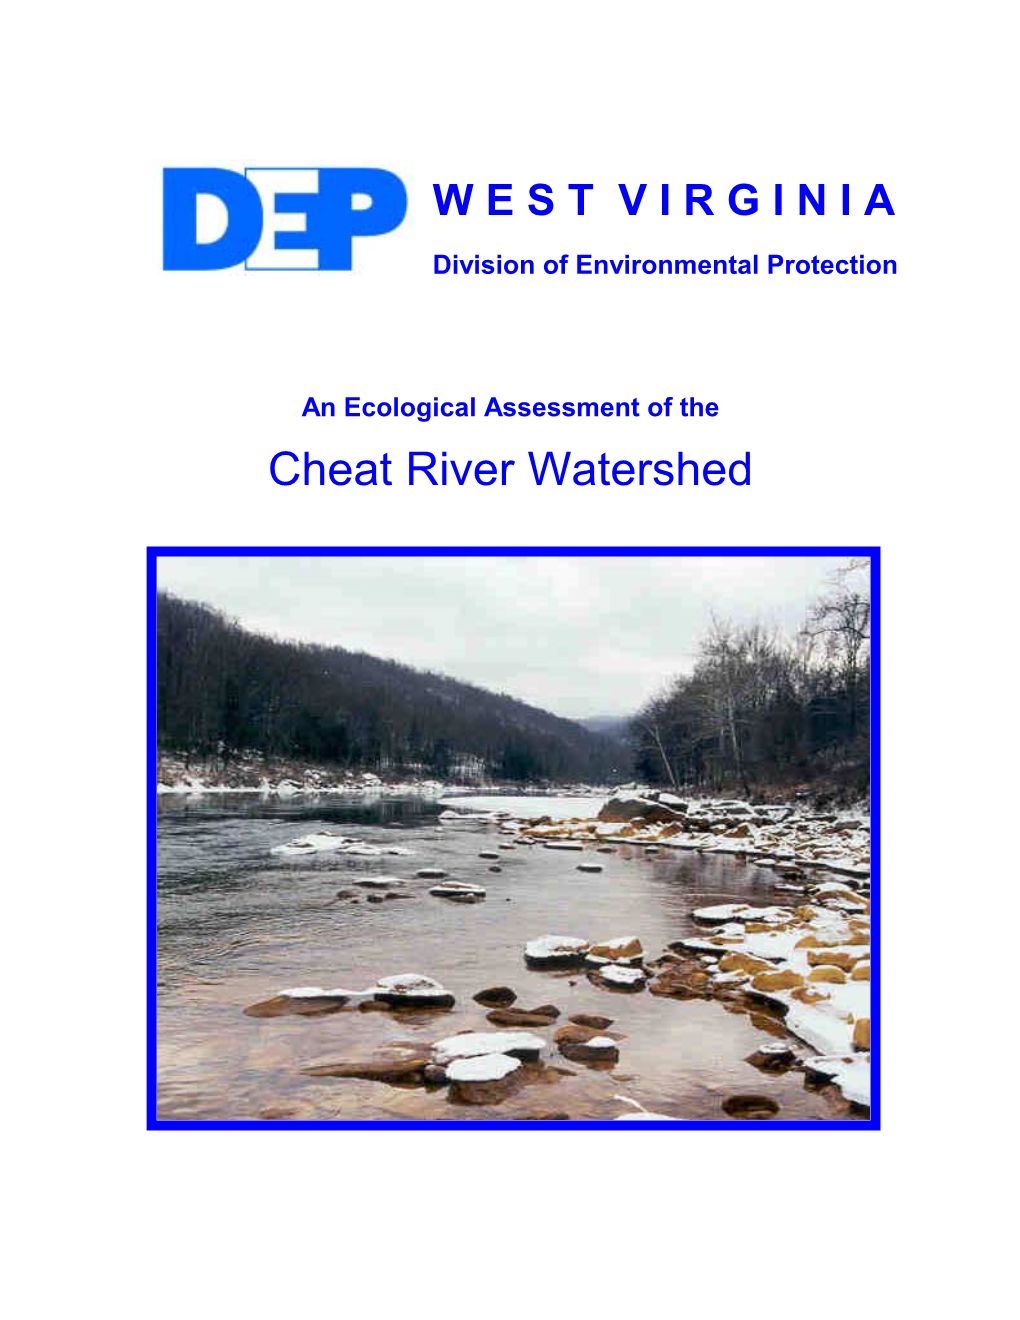 Cheat River Watershed